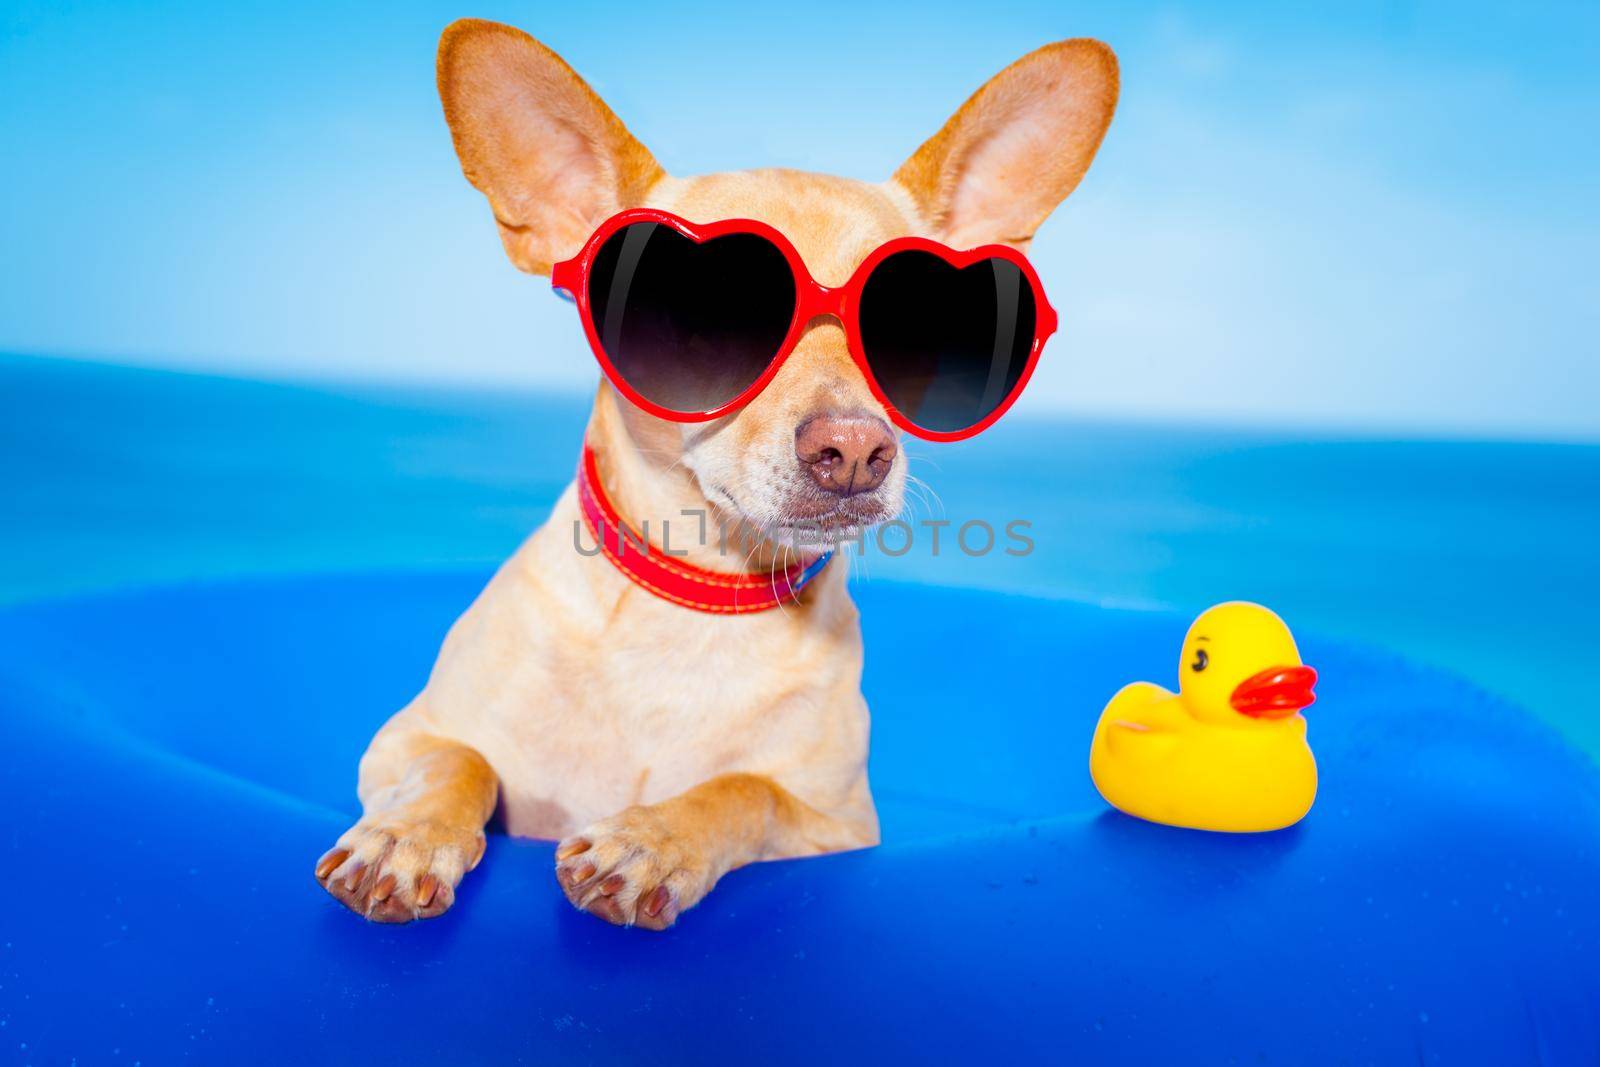 chihuahua dog  on a mattress in the ocean water at the beach, enjoying summer vacation holidays, wearing red sunglasses  with yellow     plastic rubber duck